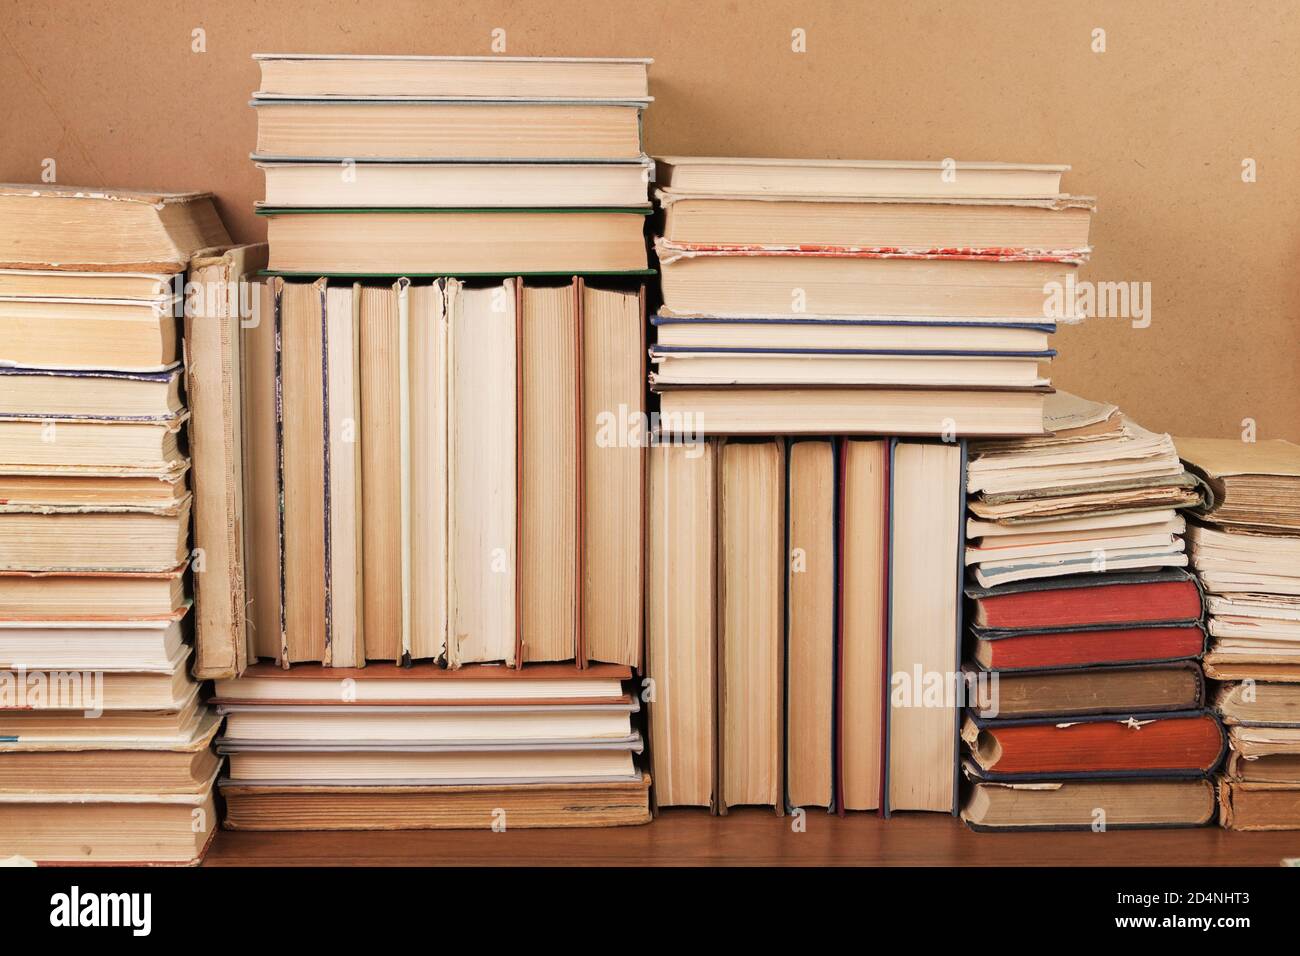 Heaps of various paper books Stock Photo